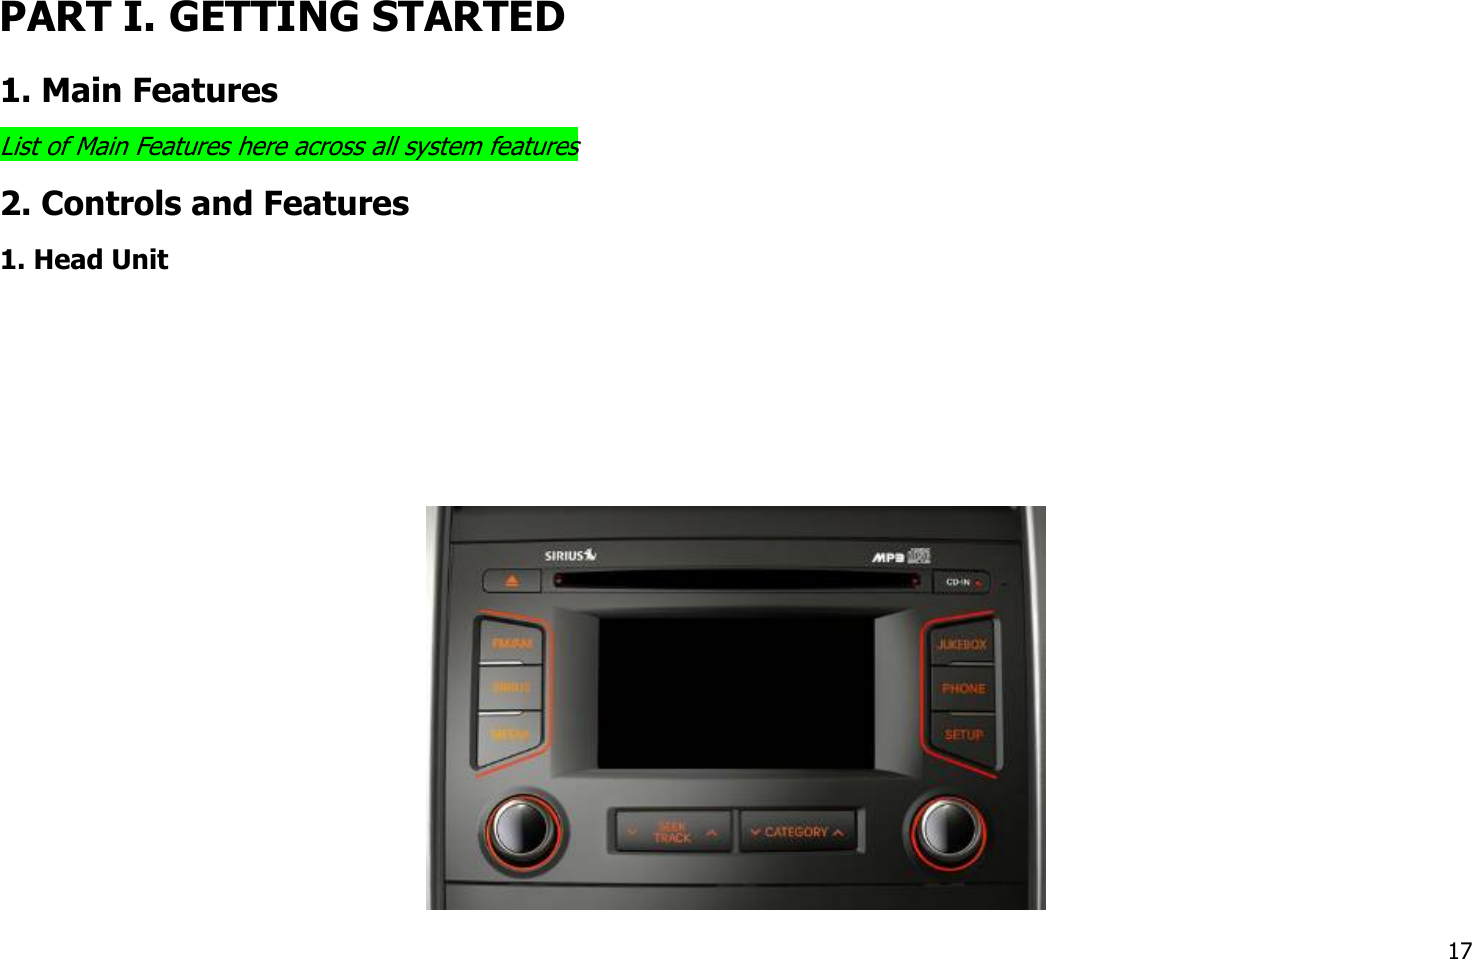  PART I. GETTING STARTED 1. Main Features List of Main Features here across all system features 2. Controls and Features 1. Head Unit         17 